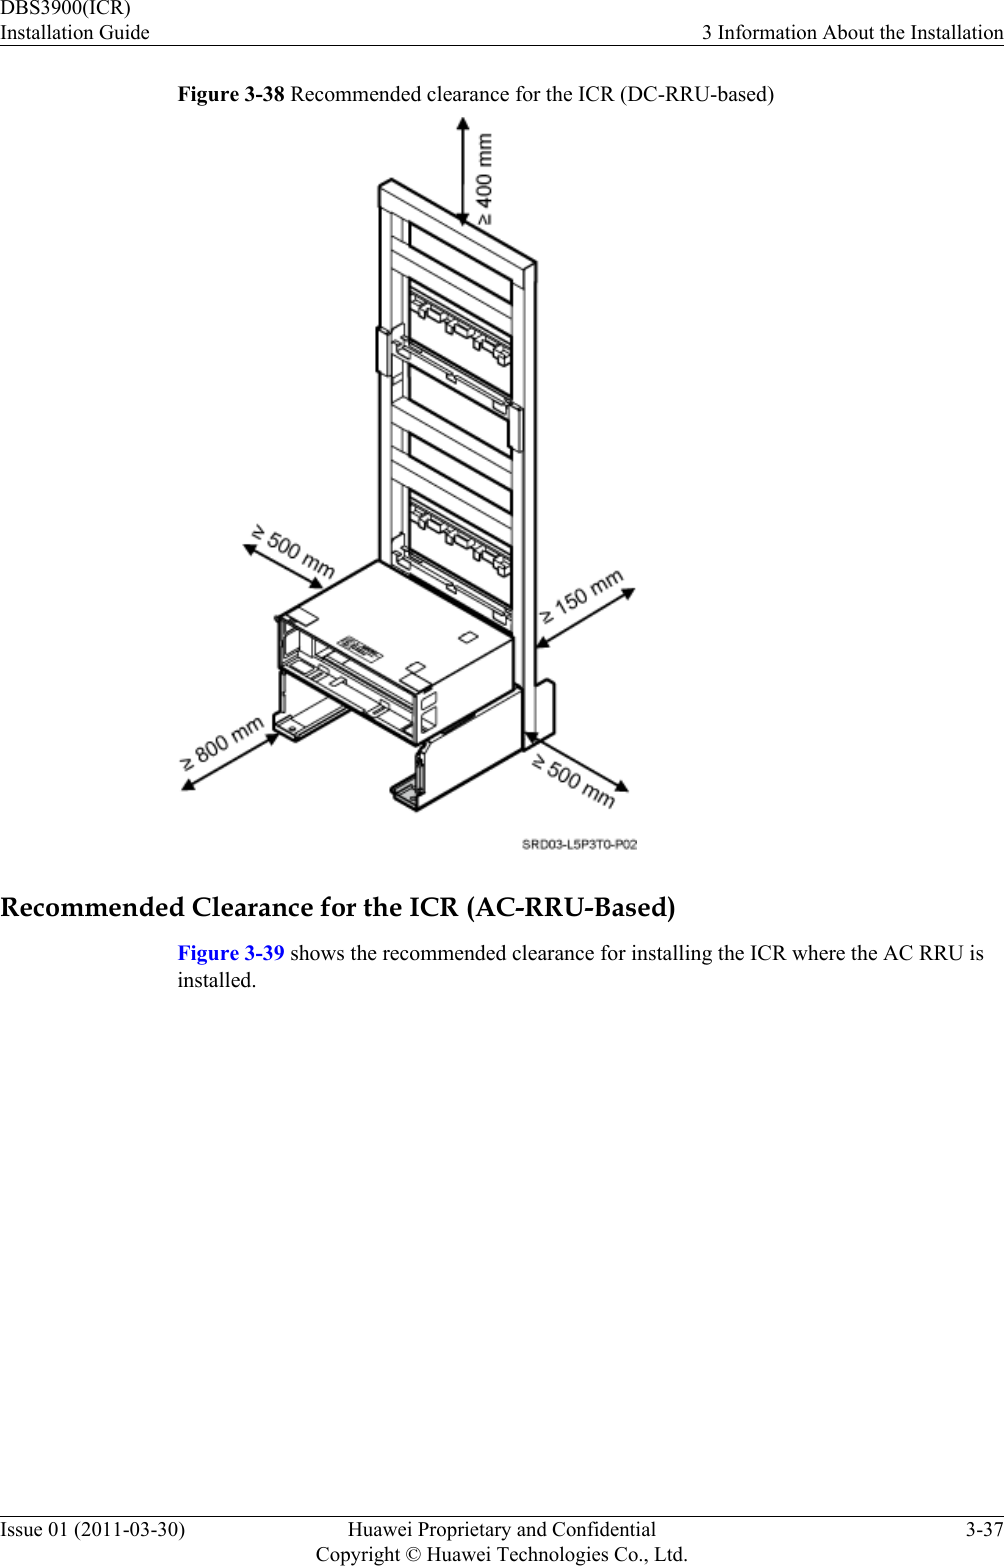 Figure 3-38 Recommended clearance for the ICR (DC-RRU-based)Recommended Clearance for the ICR (AC-RRU-Based)Figure 3-39 shows the recommended clearance for installing the ICR where the AC RRU isinstalled.DBS3900(ICR)Installation Guide 3 Information About the InstallationIssue 01 (2011-03-30) Huawei Proprietary and ConfidentialCopyright © Huawei Technologies Co., Ltd.3-37